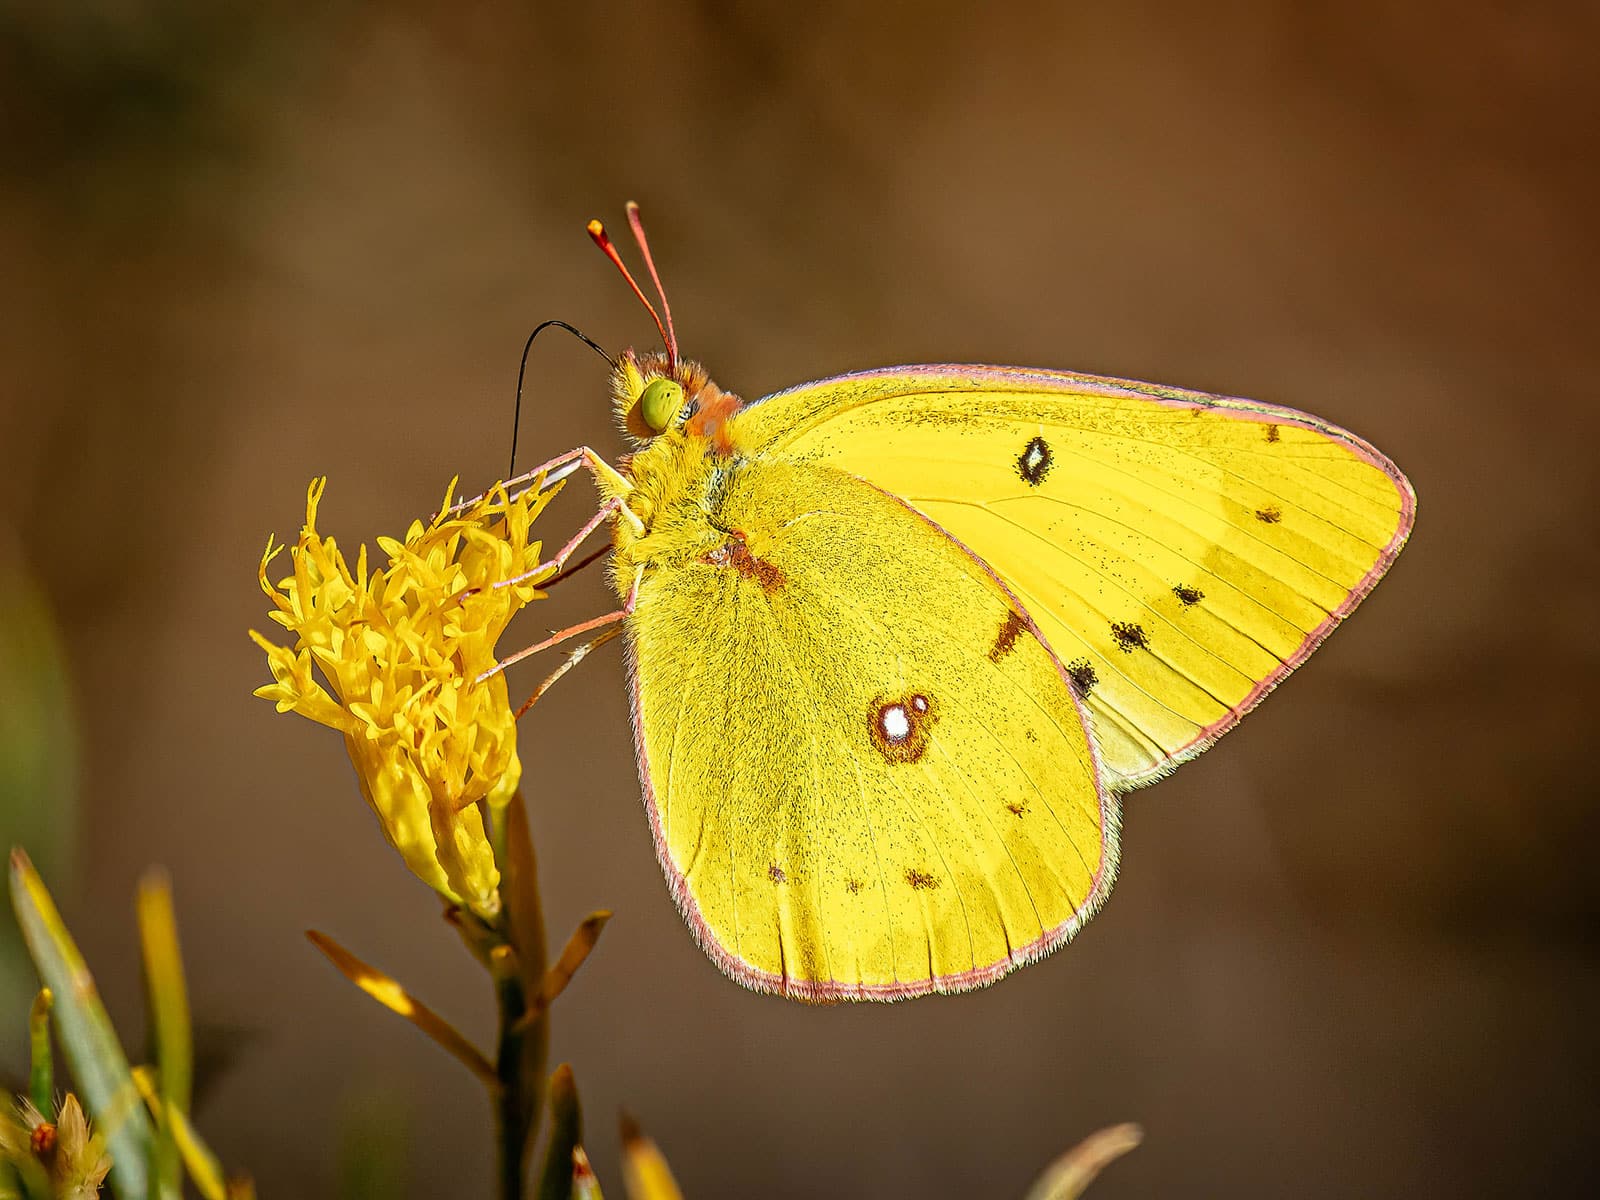 Orange sulphur butterfly standing on a small yellow flower